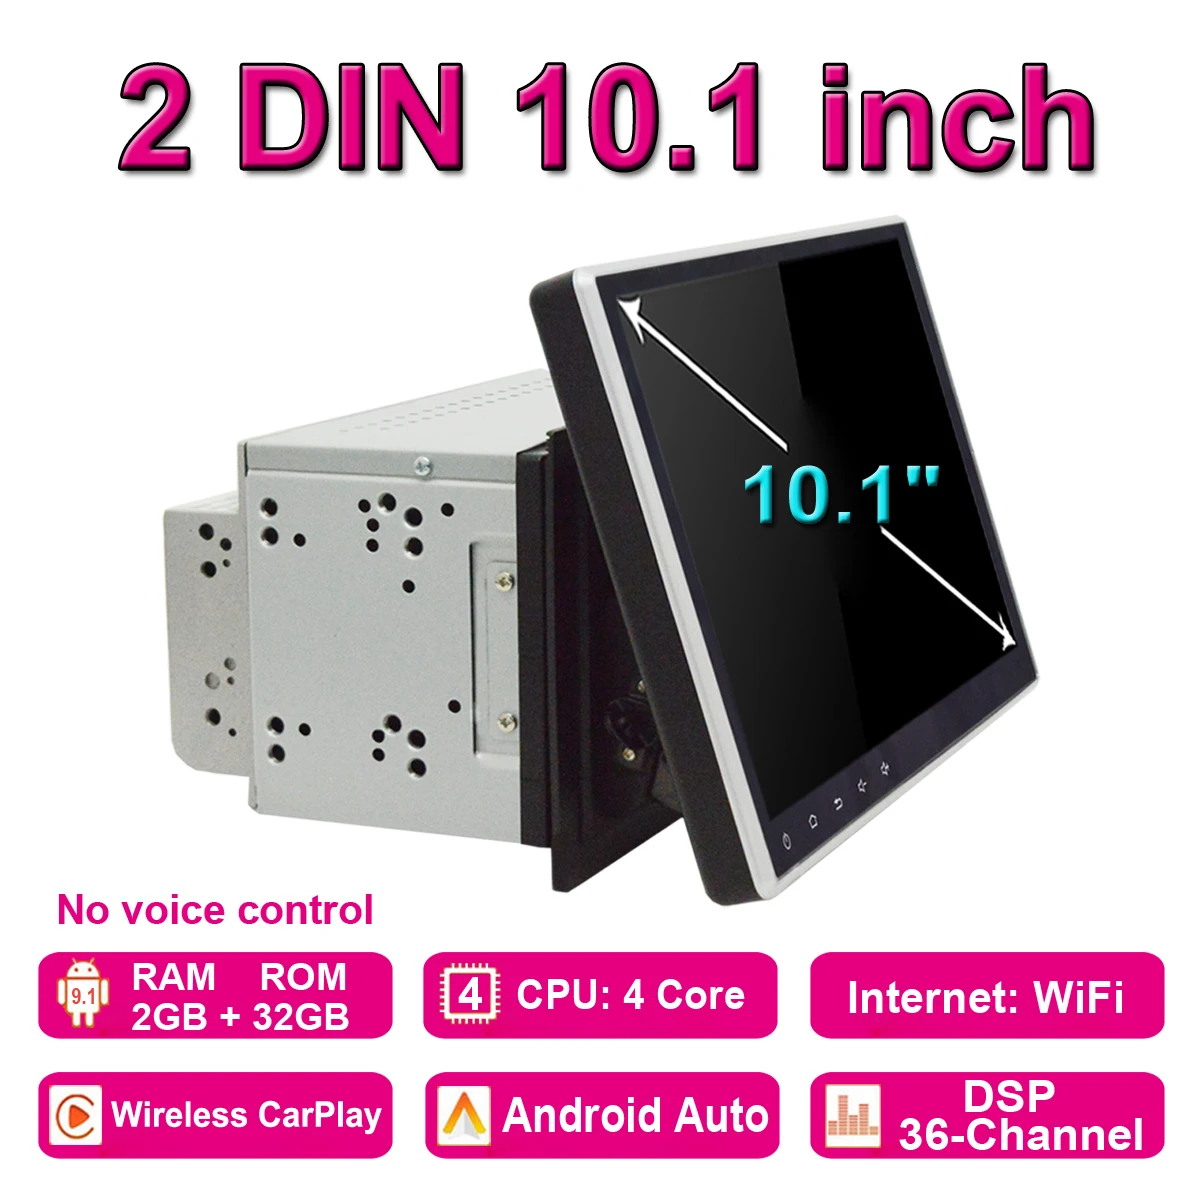 Universal 1 Din/2 Din Car Multimedia Player 10.1 Inch Touch Screen Android Car Radio Stereo GPS WiFi Audio Video Player android car stereo Car Multimedia Players